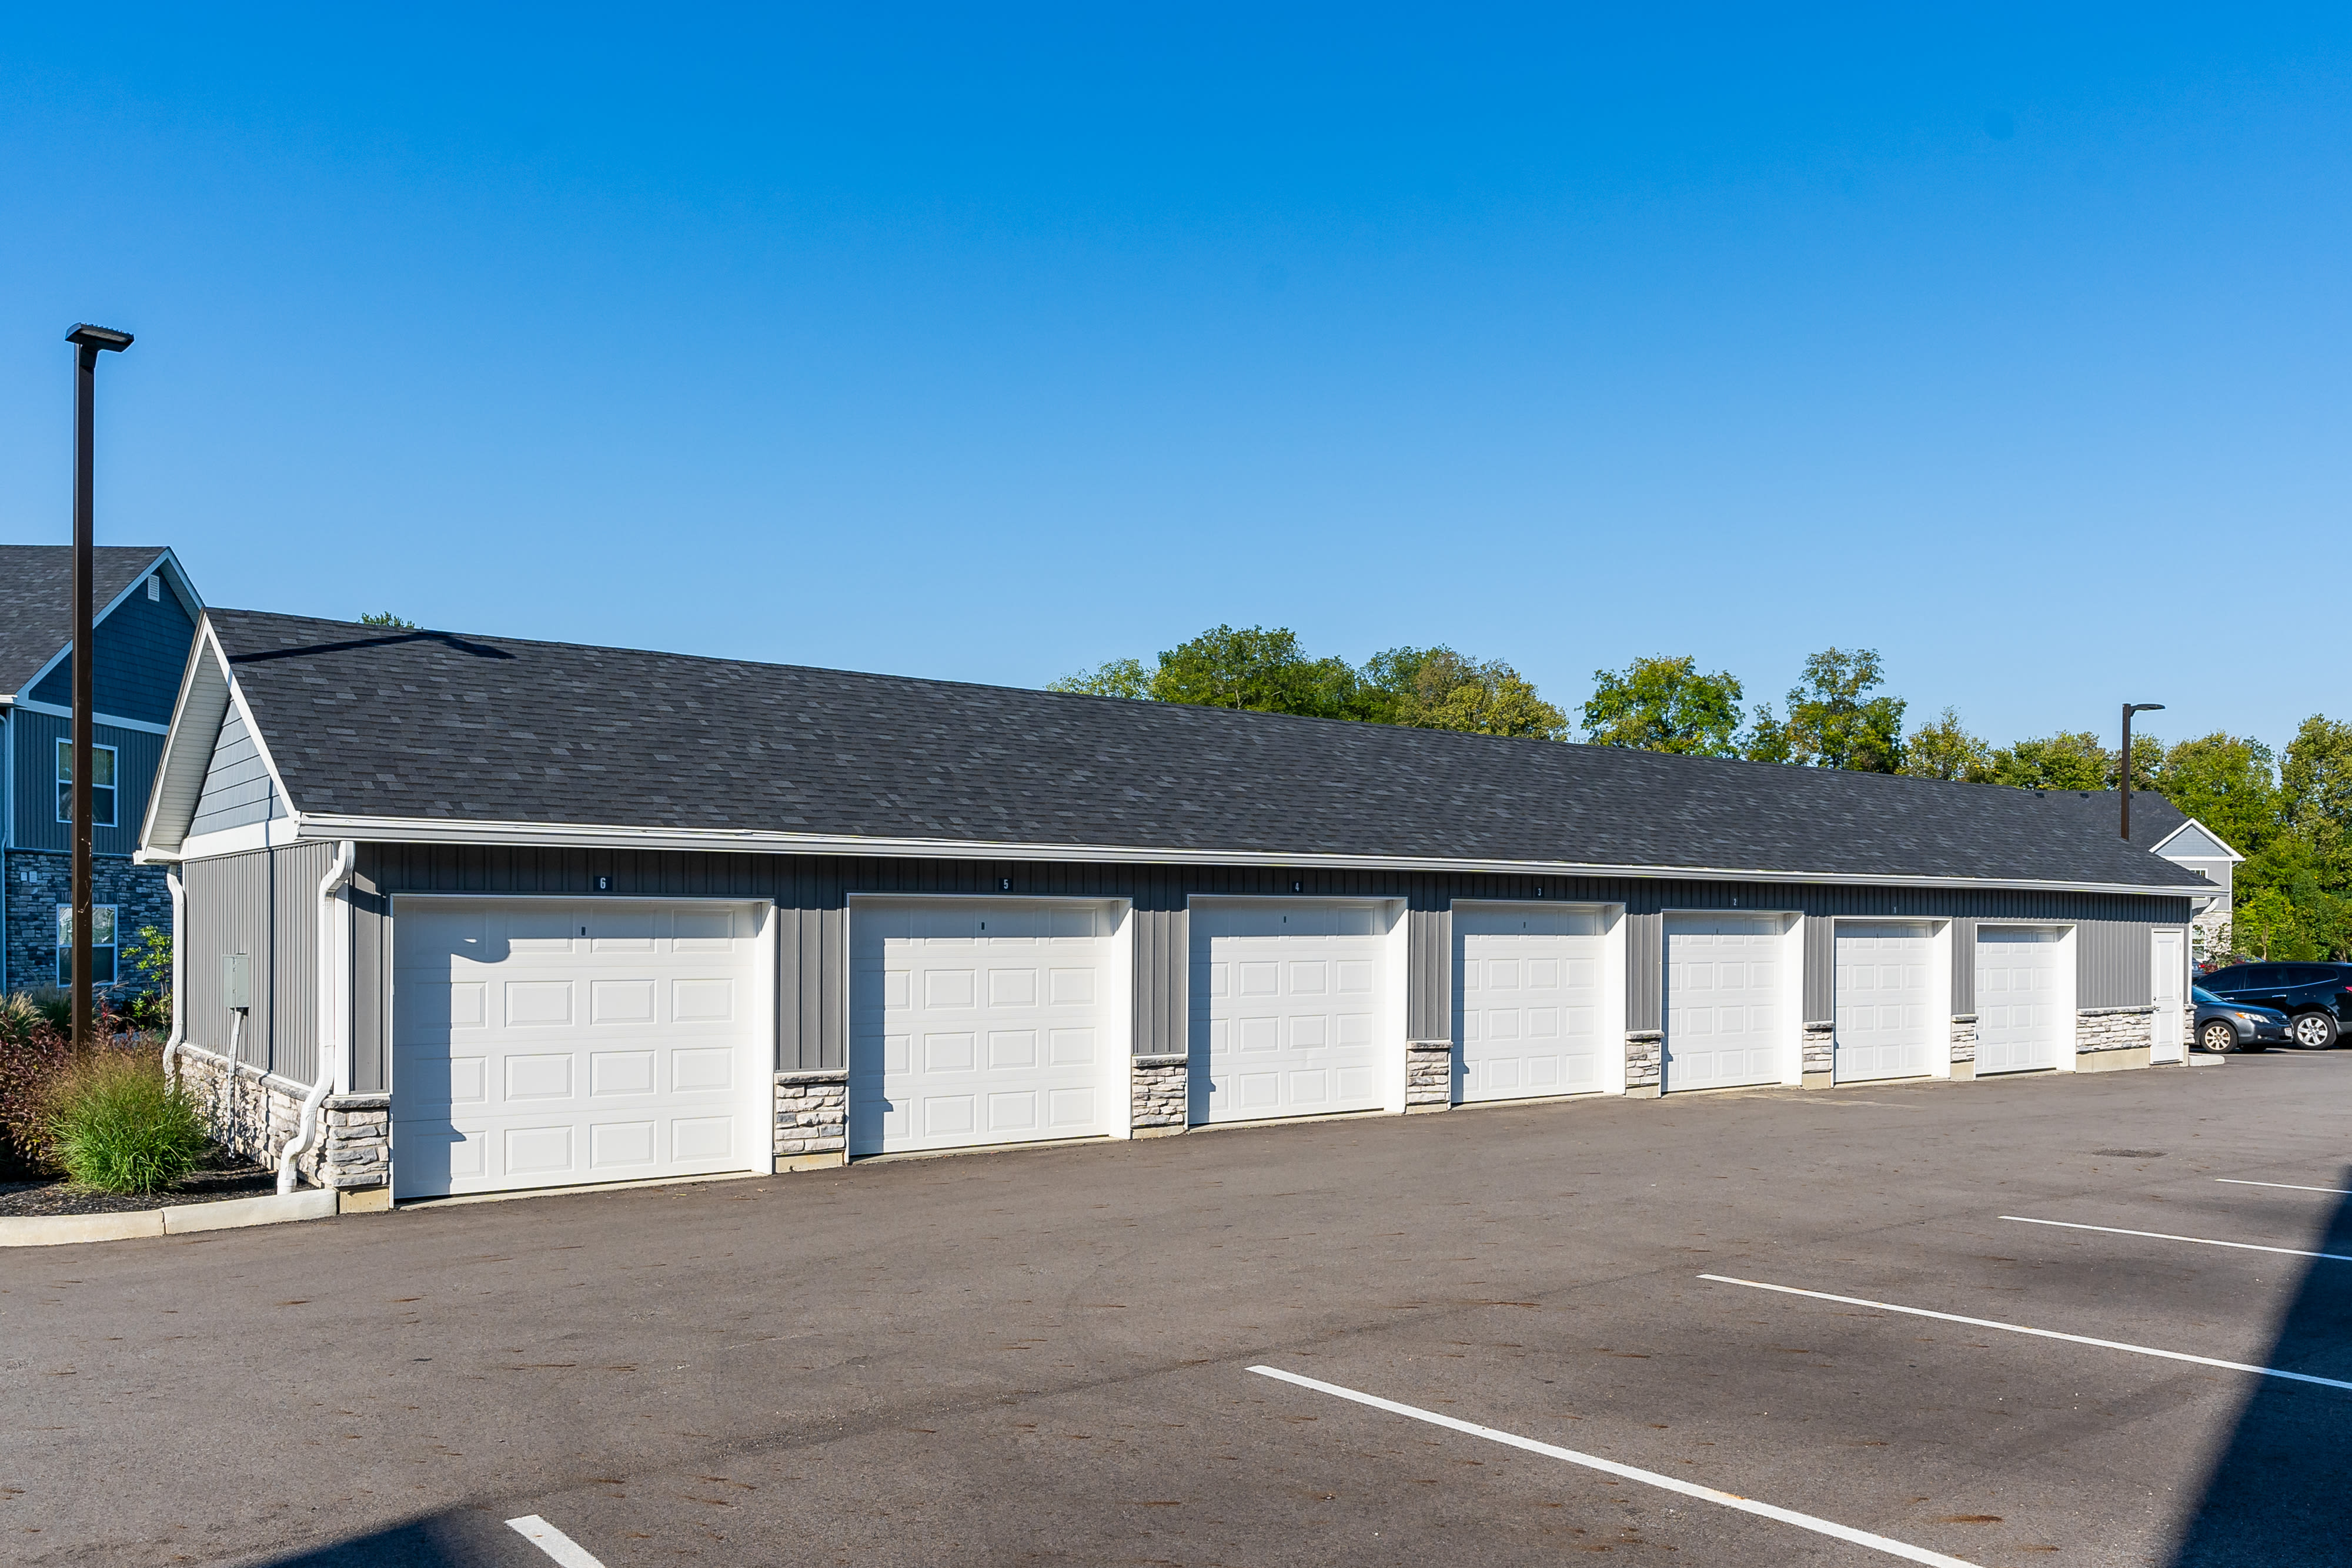 Enjoy apartments with garages at Alexander Pointe Apartments in Maineville, Ohio